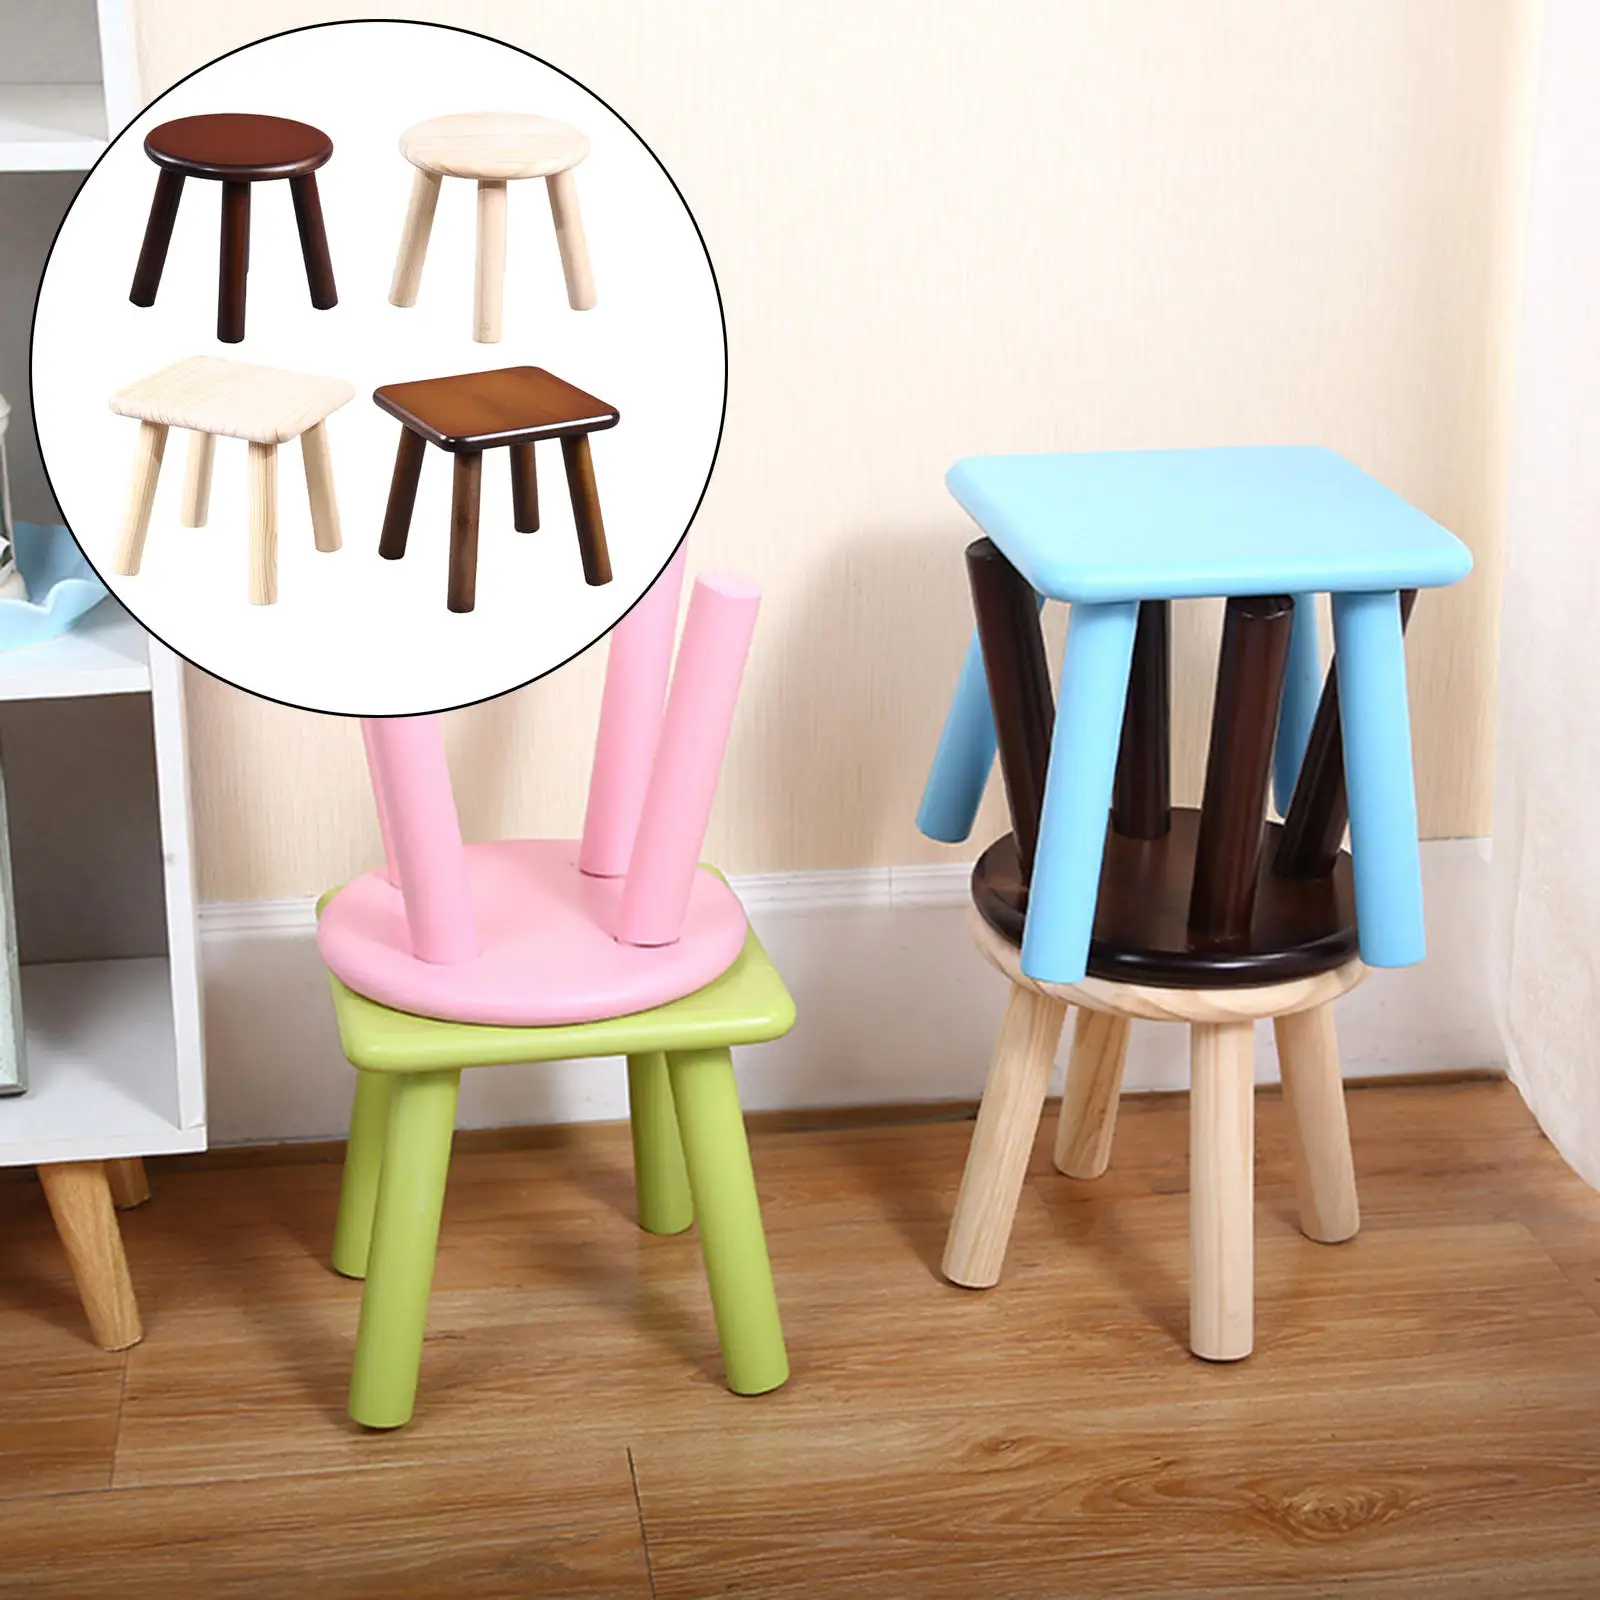 Portable Children's Stool Thick Leg Posts Footboard Comfortable Thickened Panel Furniture Low Stool for Playroom Kids Toddlers